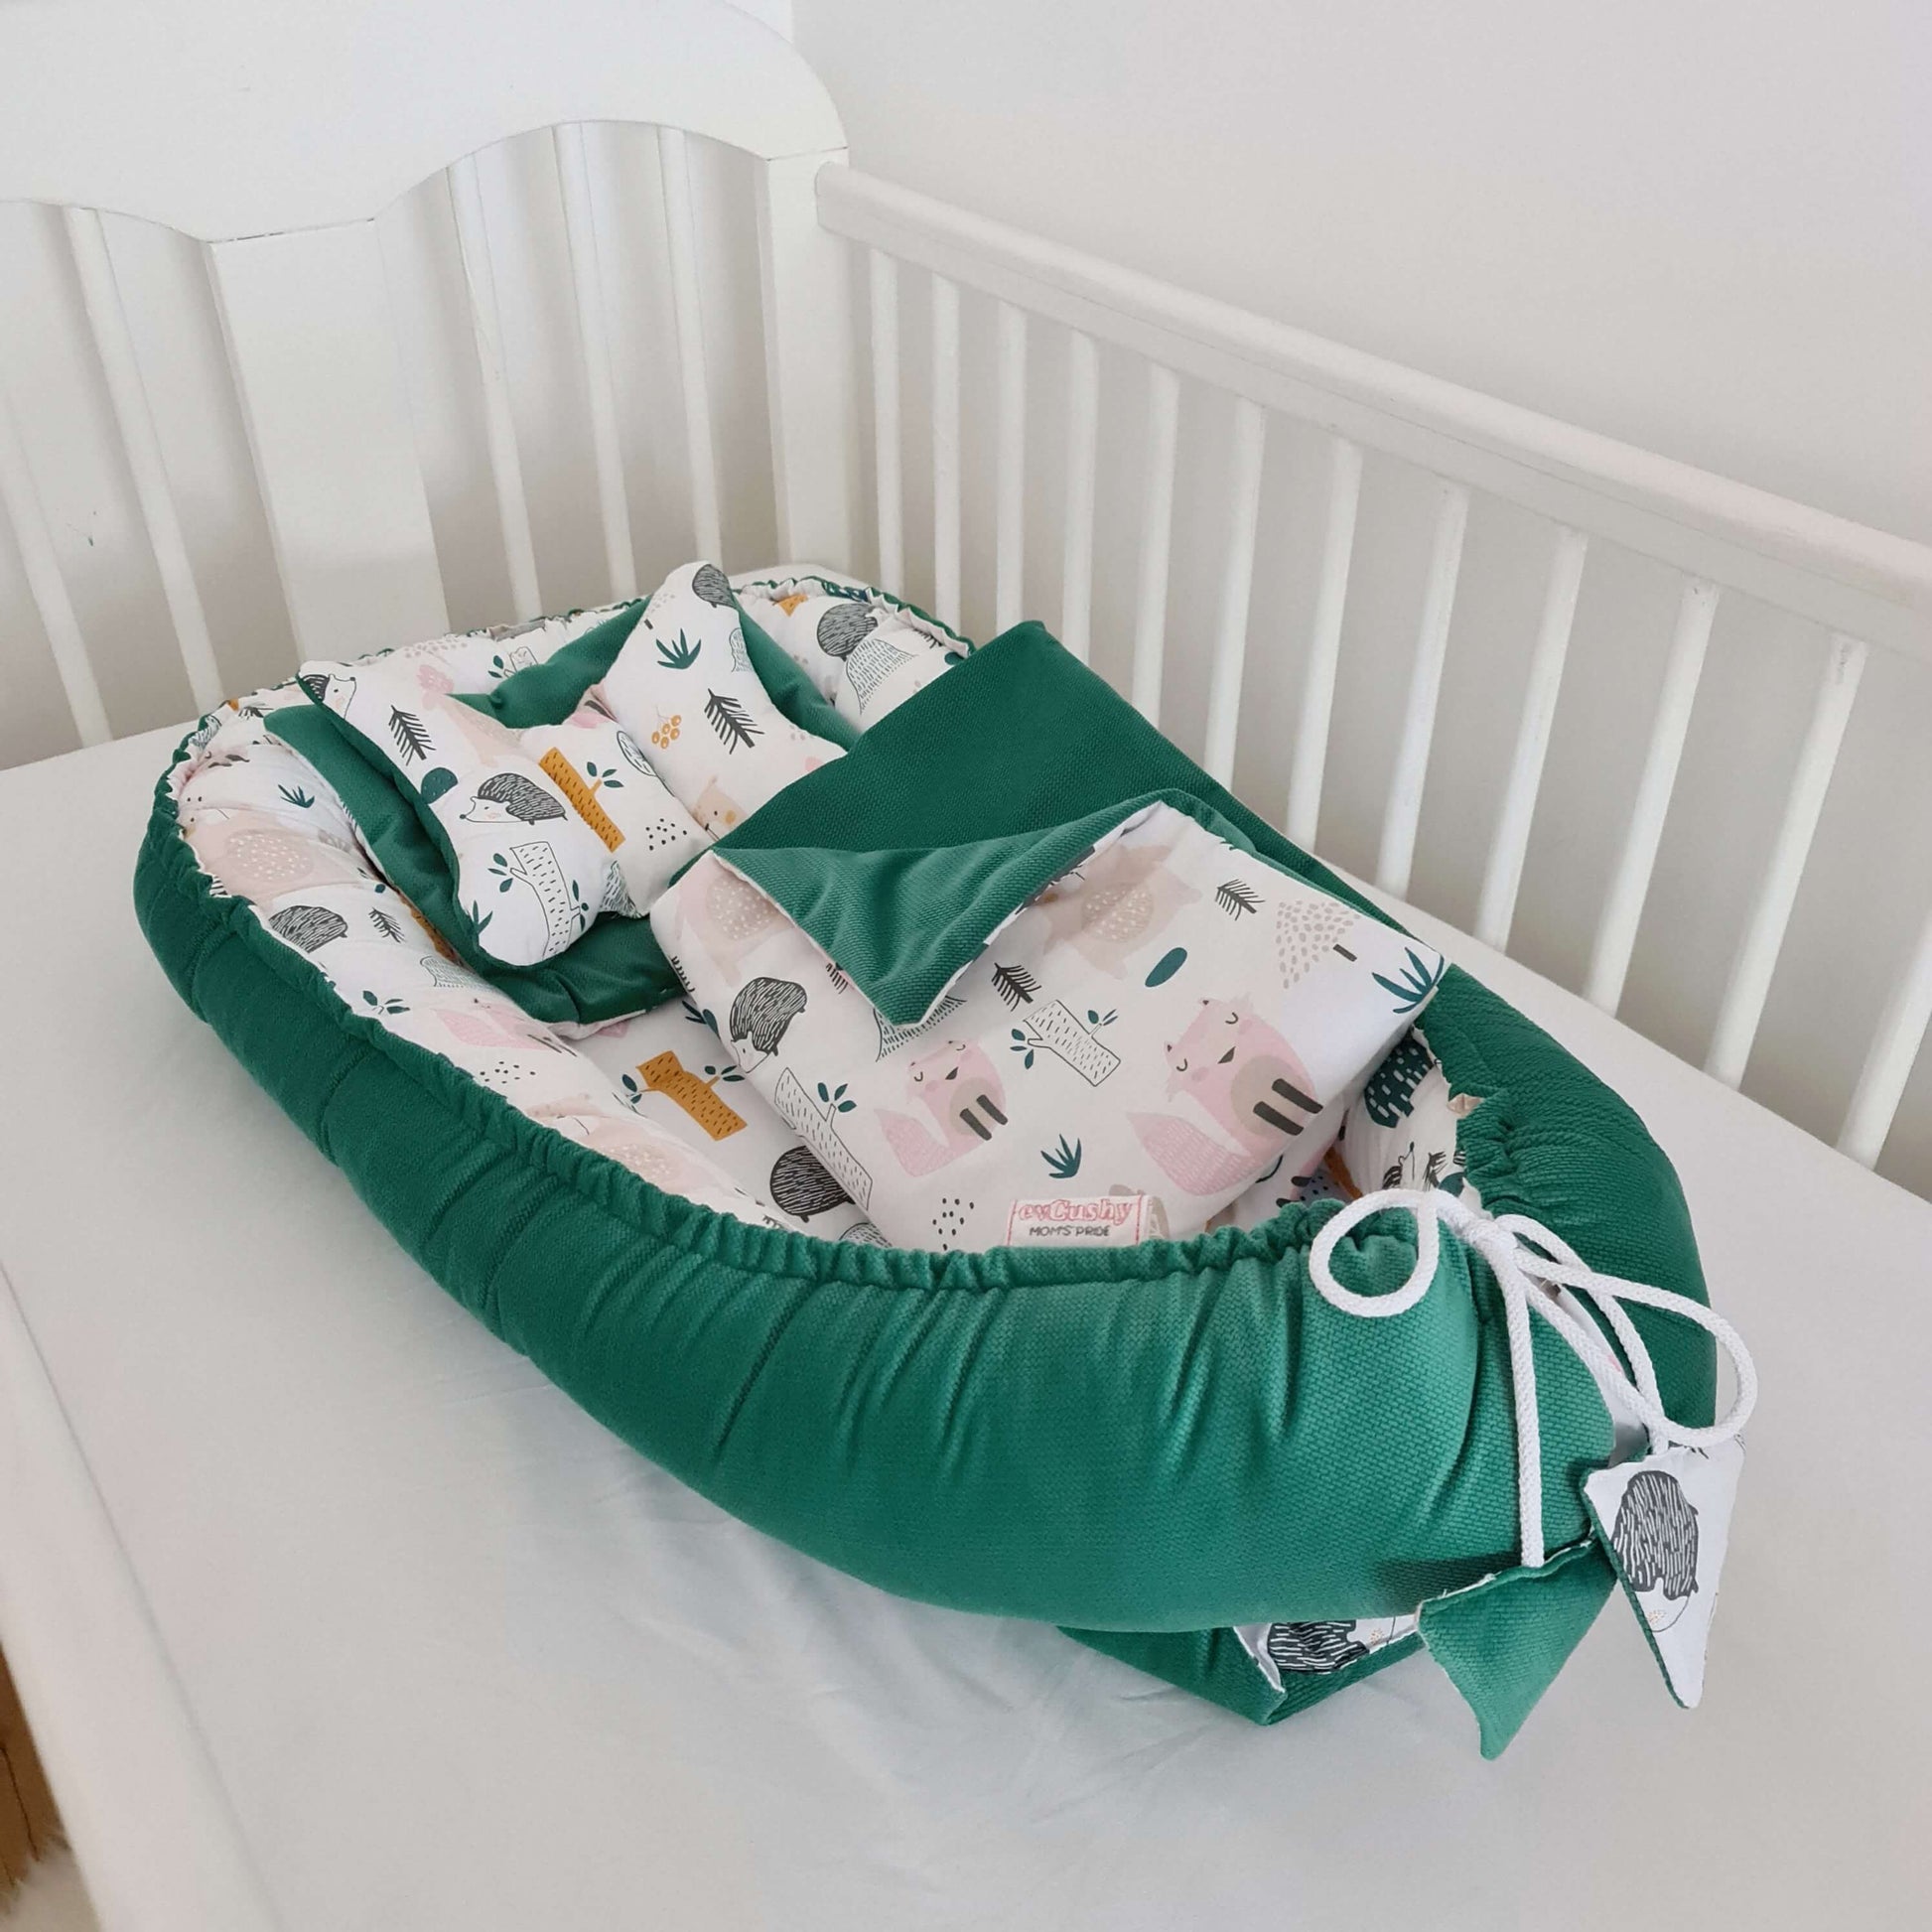 new baby accessories for sleep blanket pillow nest pod 